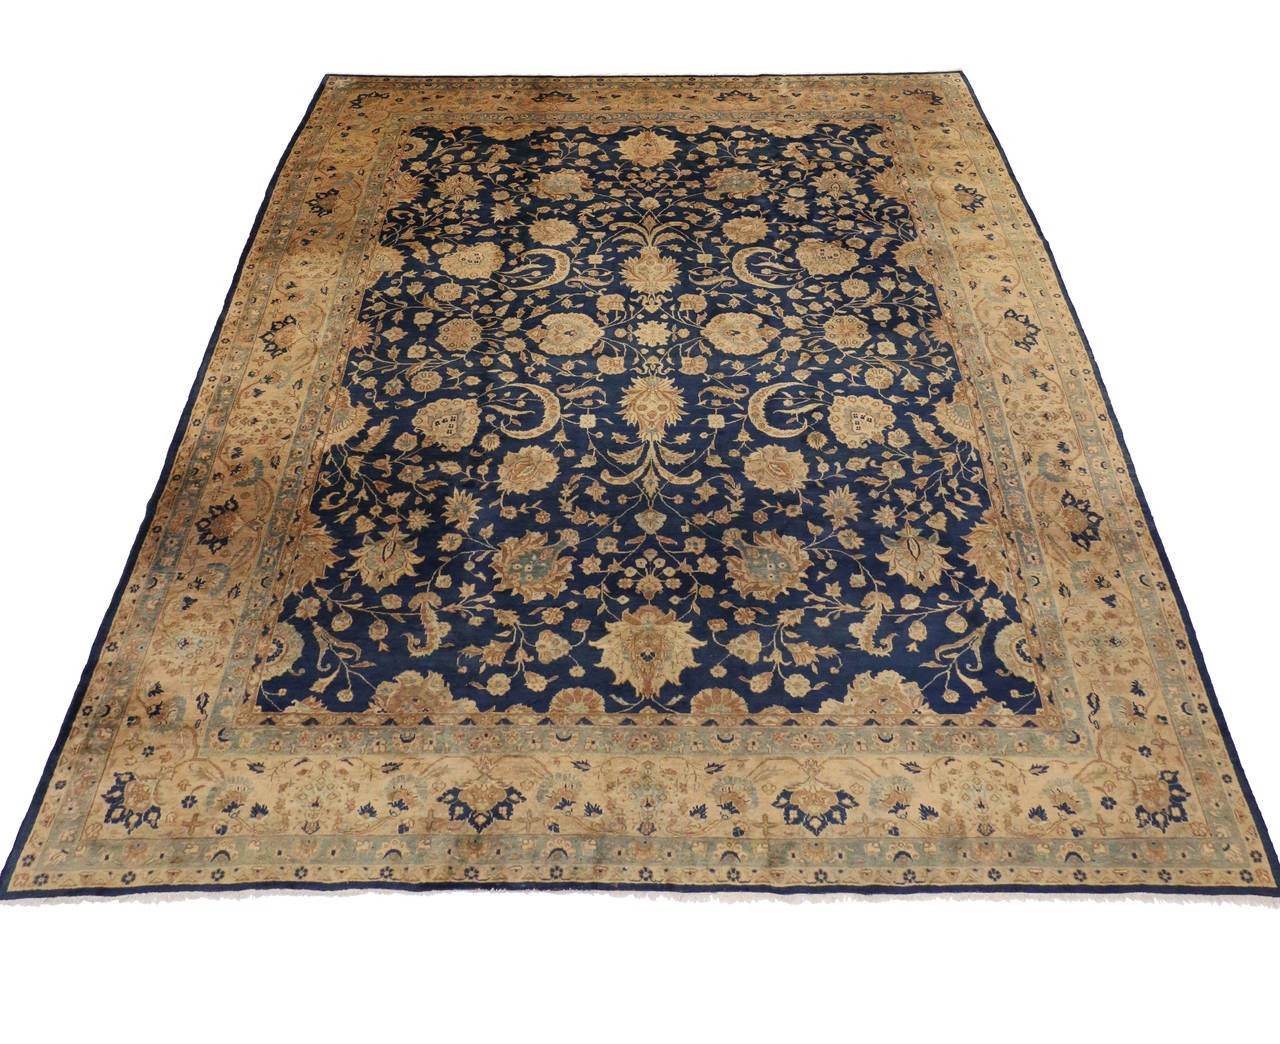 Wool Antique Indian Agra Rug with Hollywood Regency Style